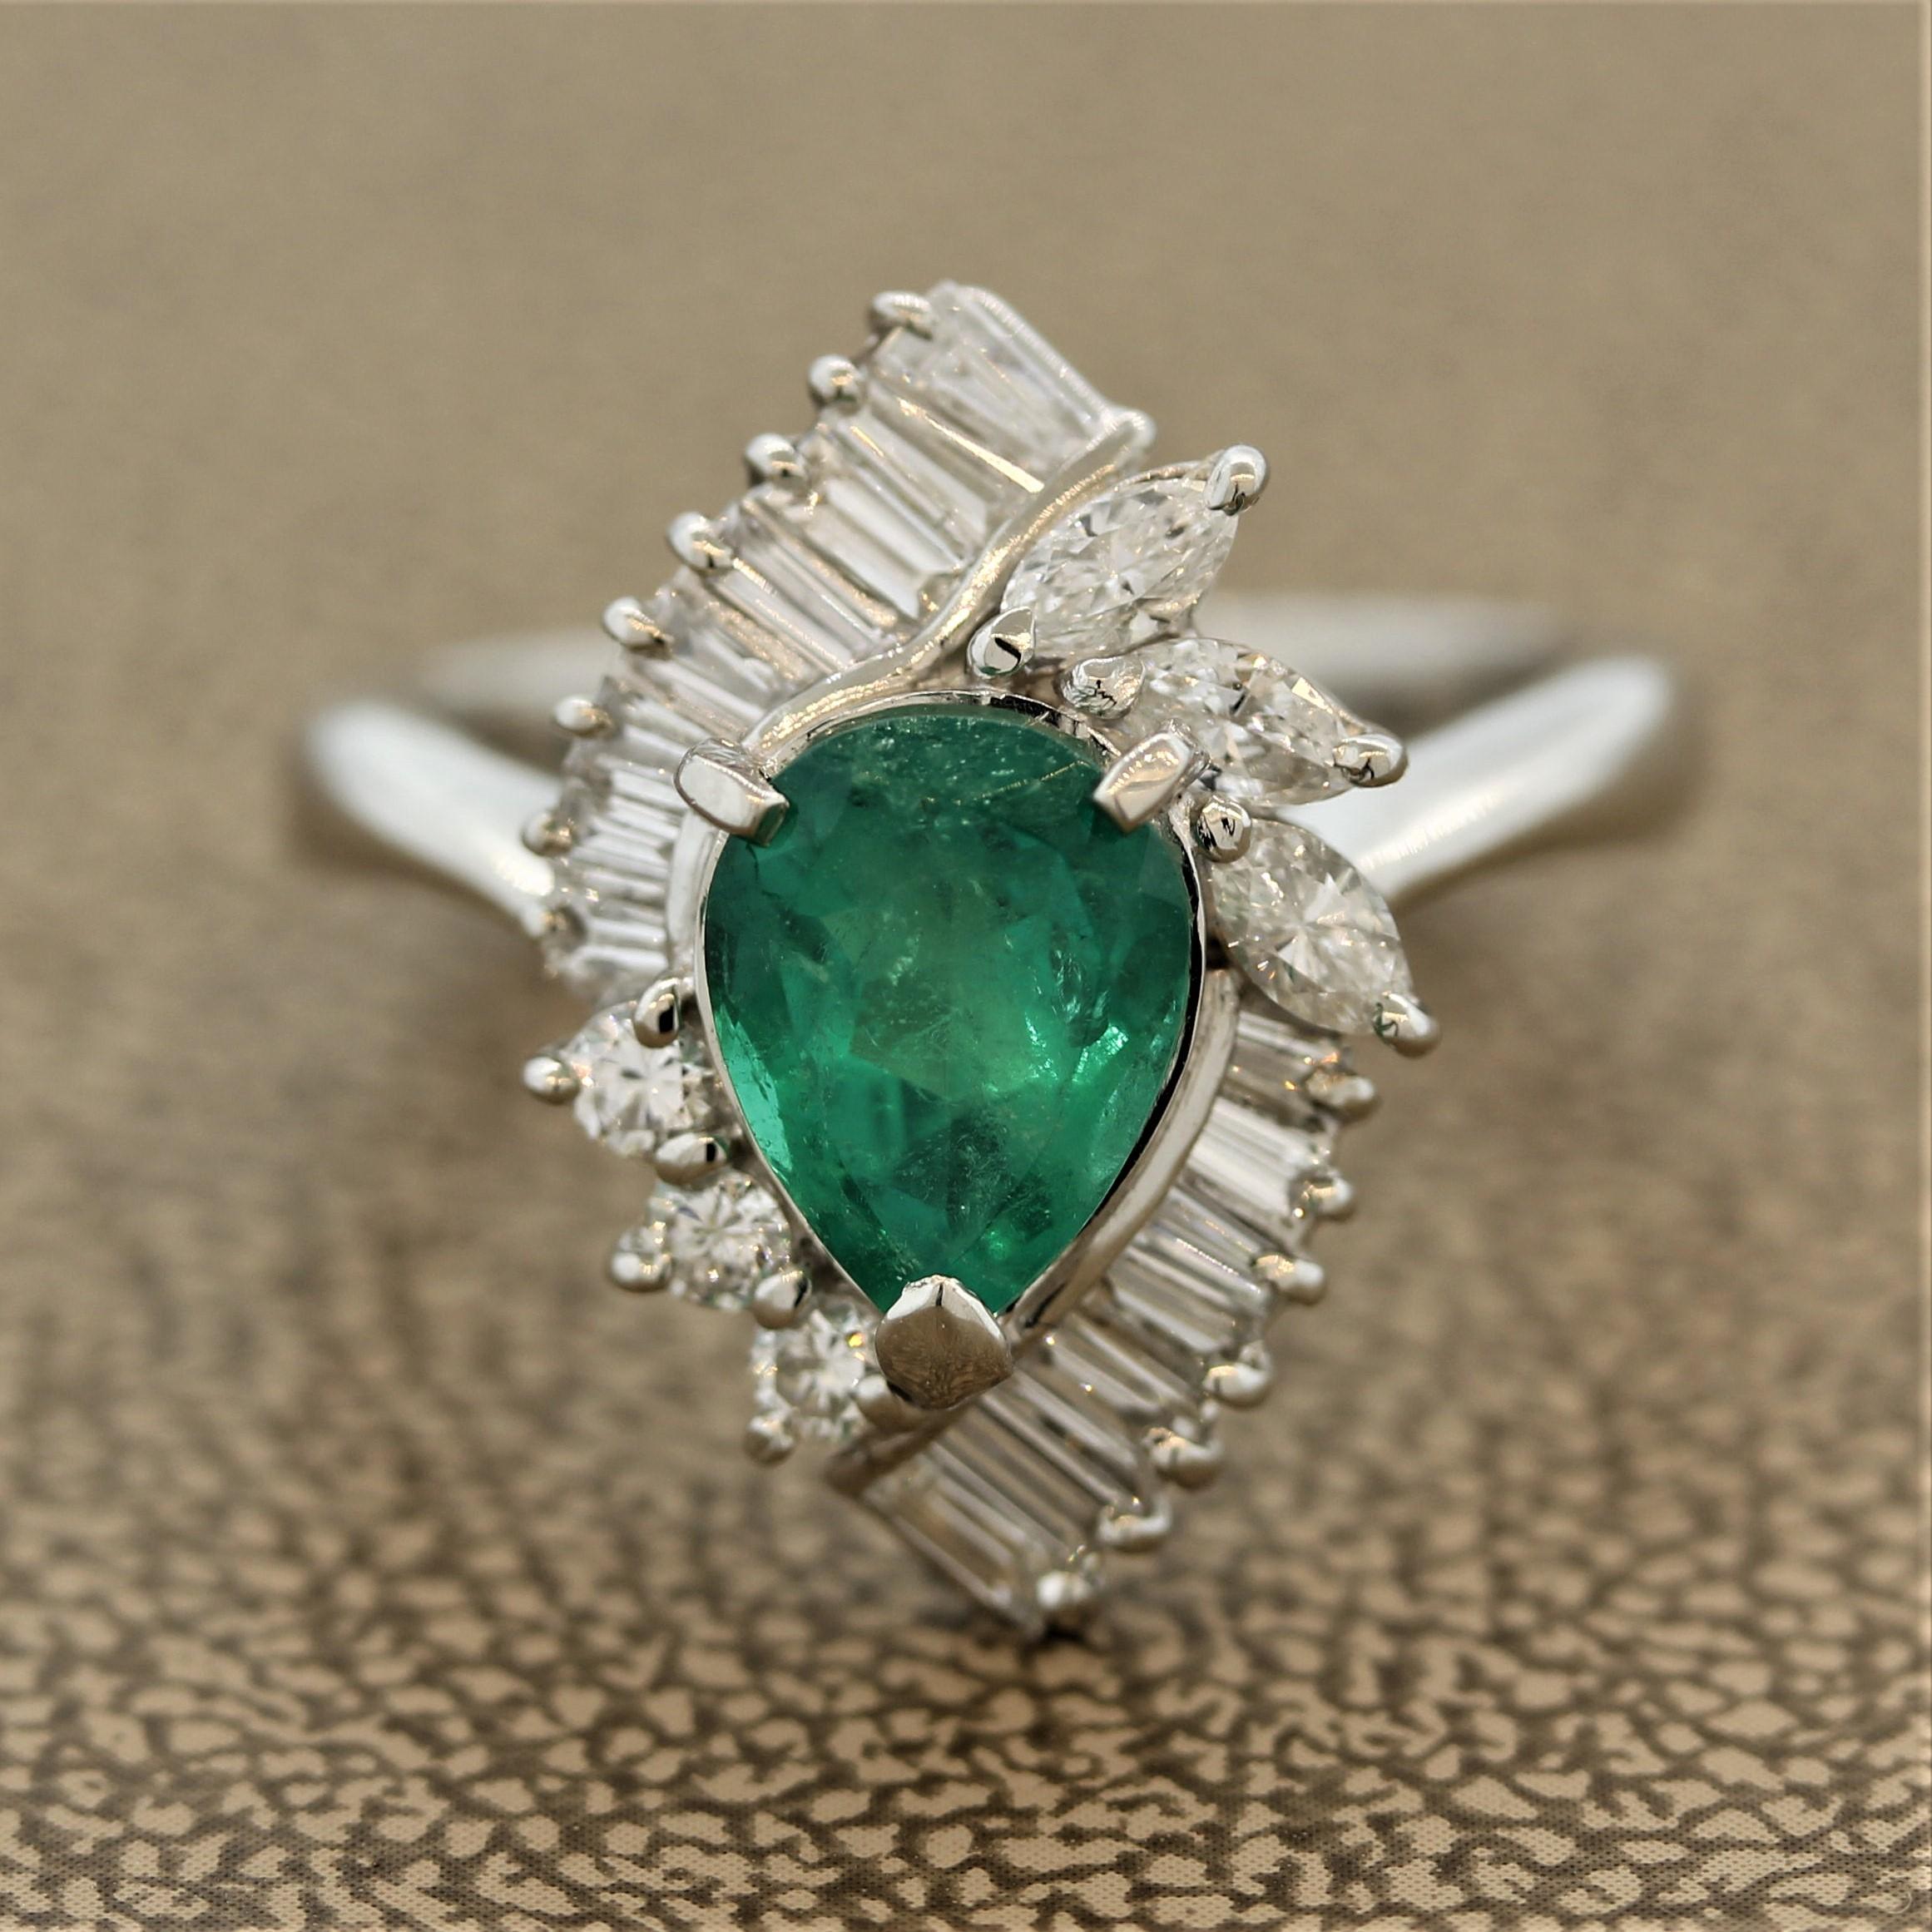 An elegant ring featuring a 1.41 carat pear shaped emerald with a fine rich green color typical of Colombian emeralds. It is surrounded by a cluster of marquise and baguette shaped diamonds weighing 0.72 carats. Hand-fabricated in platinum.

Ring